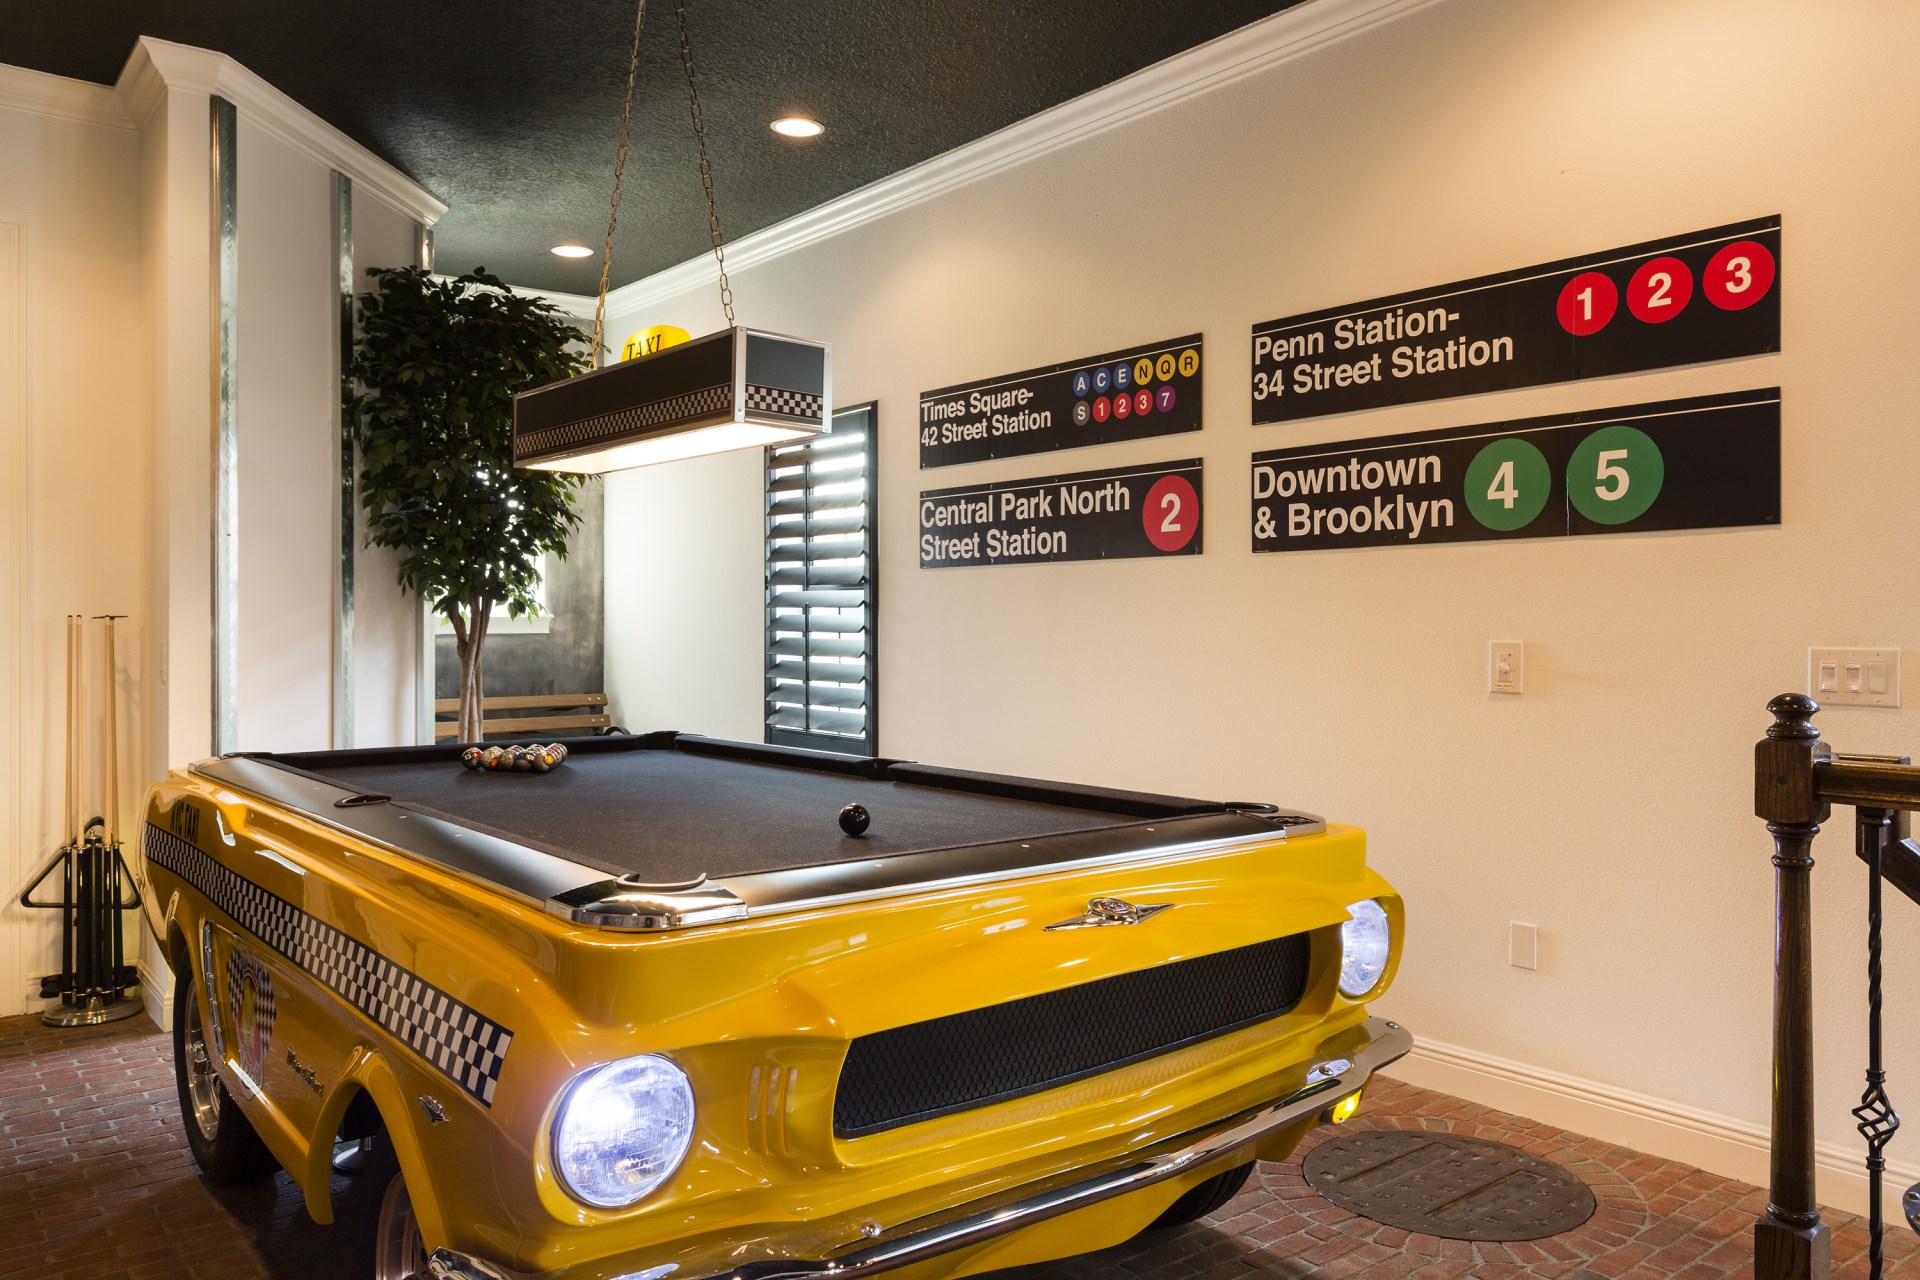 A New York City-inspired games room with vintage subway signs and widescreen TV